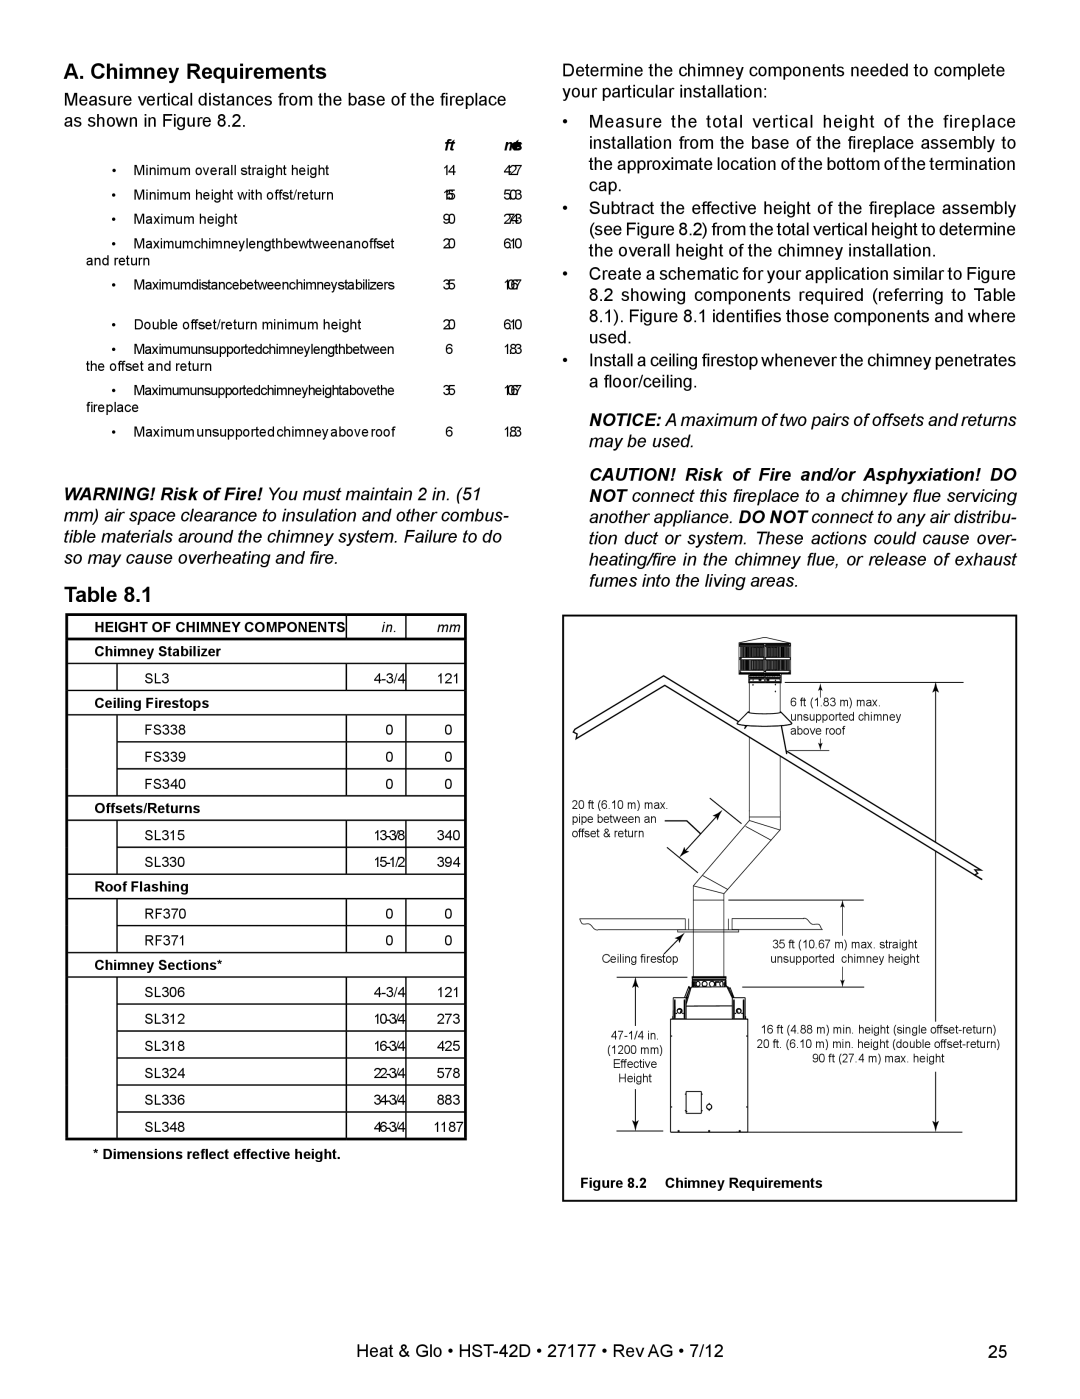 Heat & Glo LifeStyle HST-42D owner manual A. Chimney Requirements 